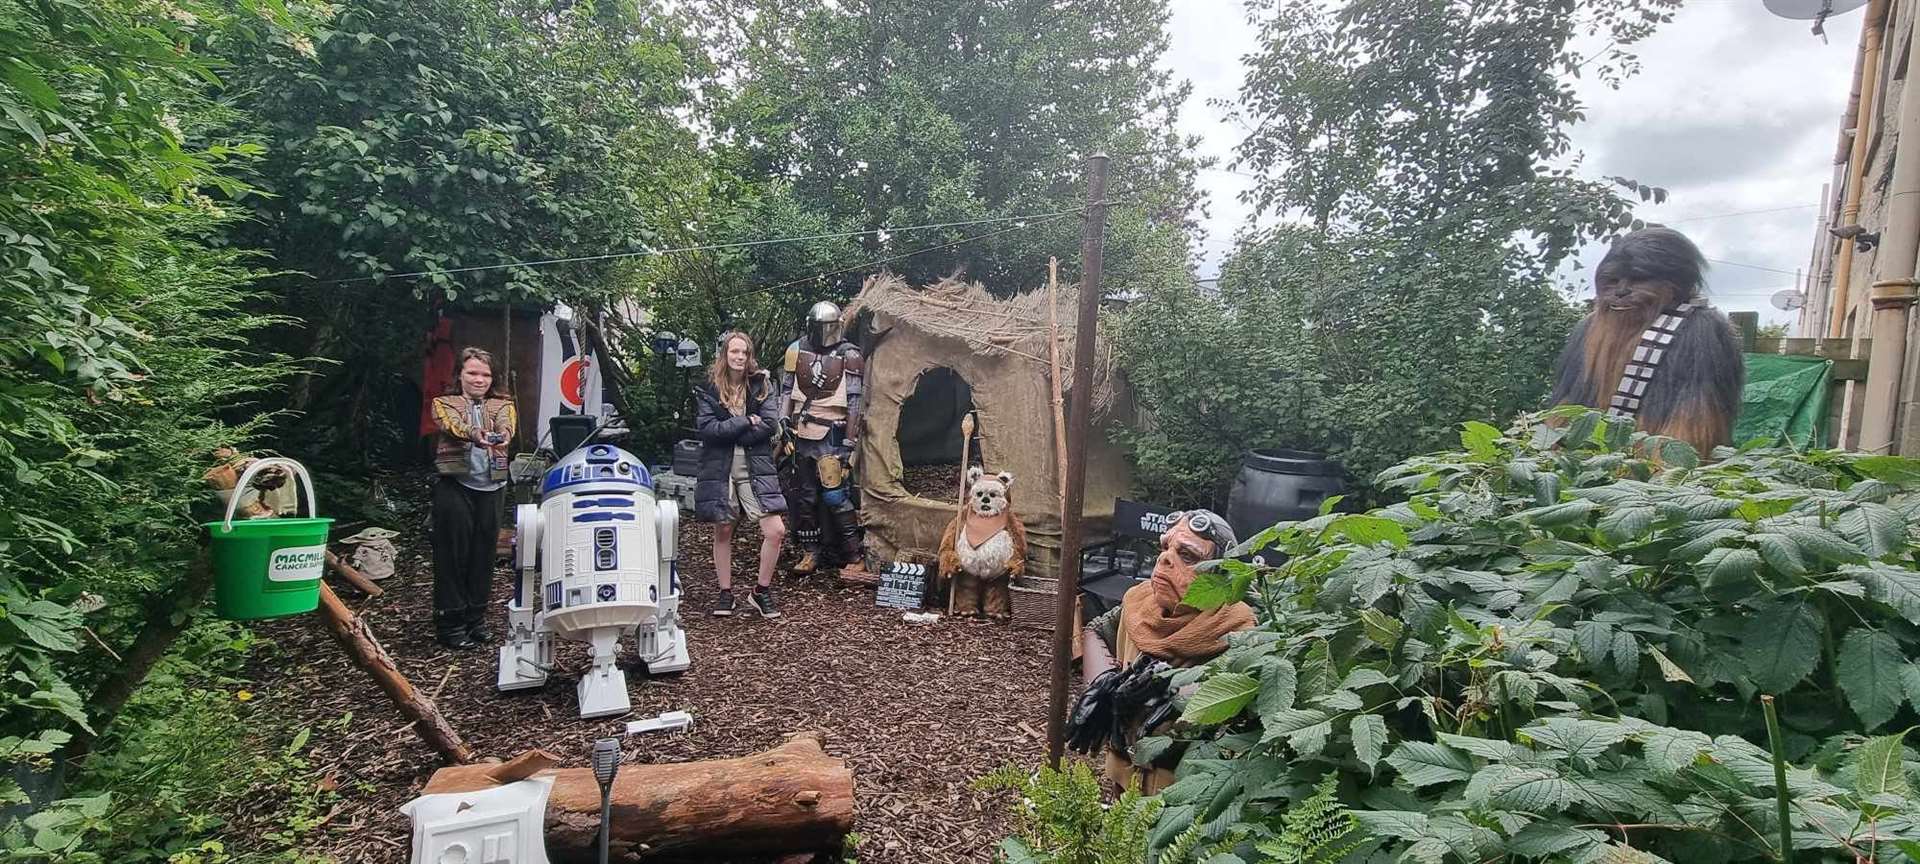 Mark has spent six years putting the Star Wars garden behind his home in the town centre together.